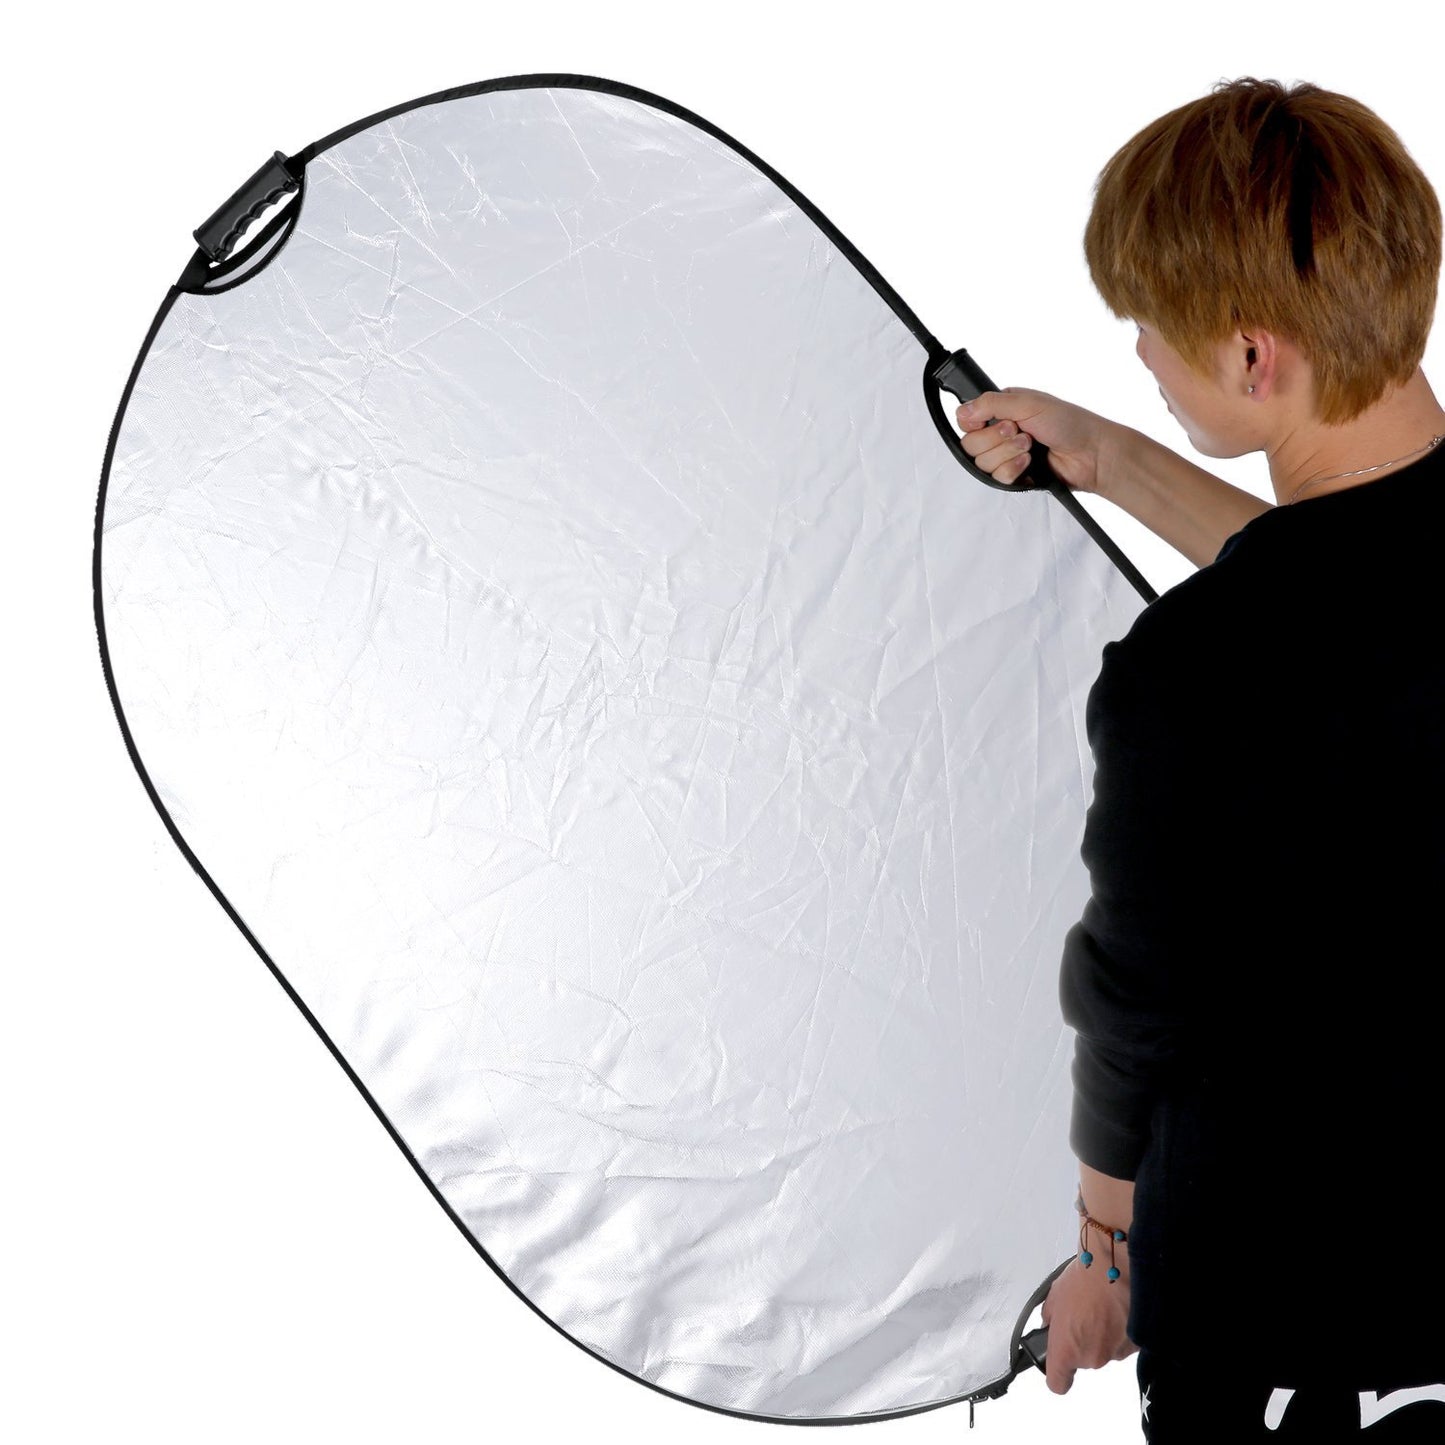 Pxel RF-10X15 5 in 1 Portable Multi 40"x 60"/100 x 150CM Camera Lighting Reflector Diffuser Kit with Carrying Case for Photography